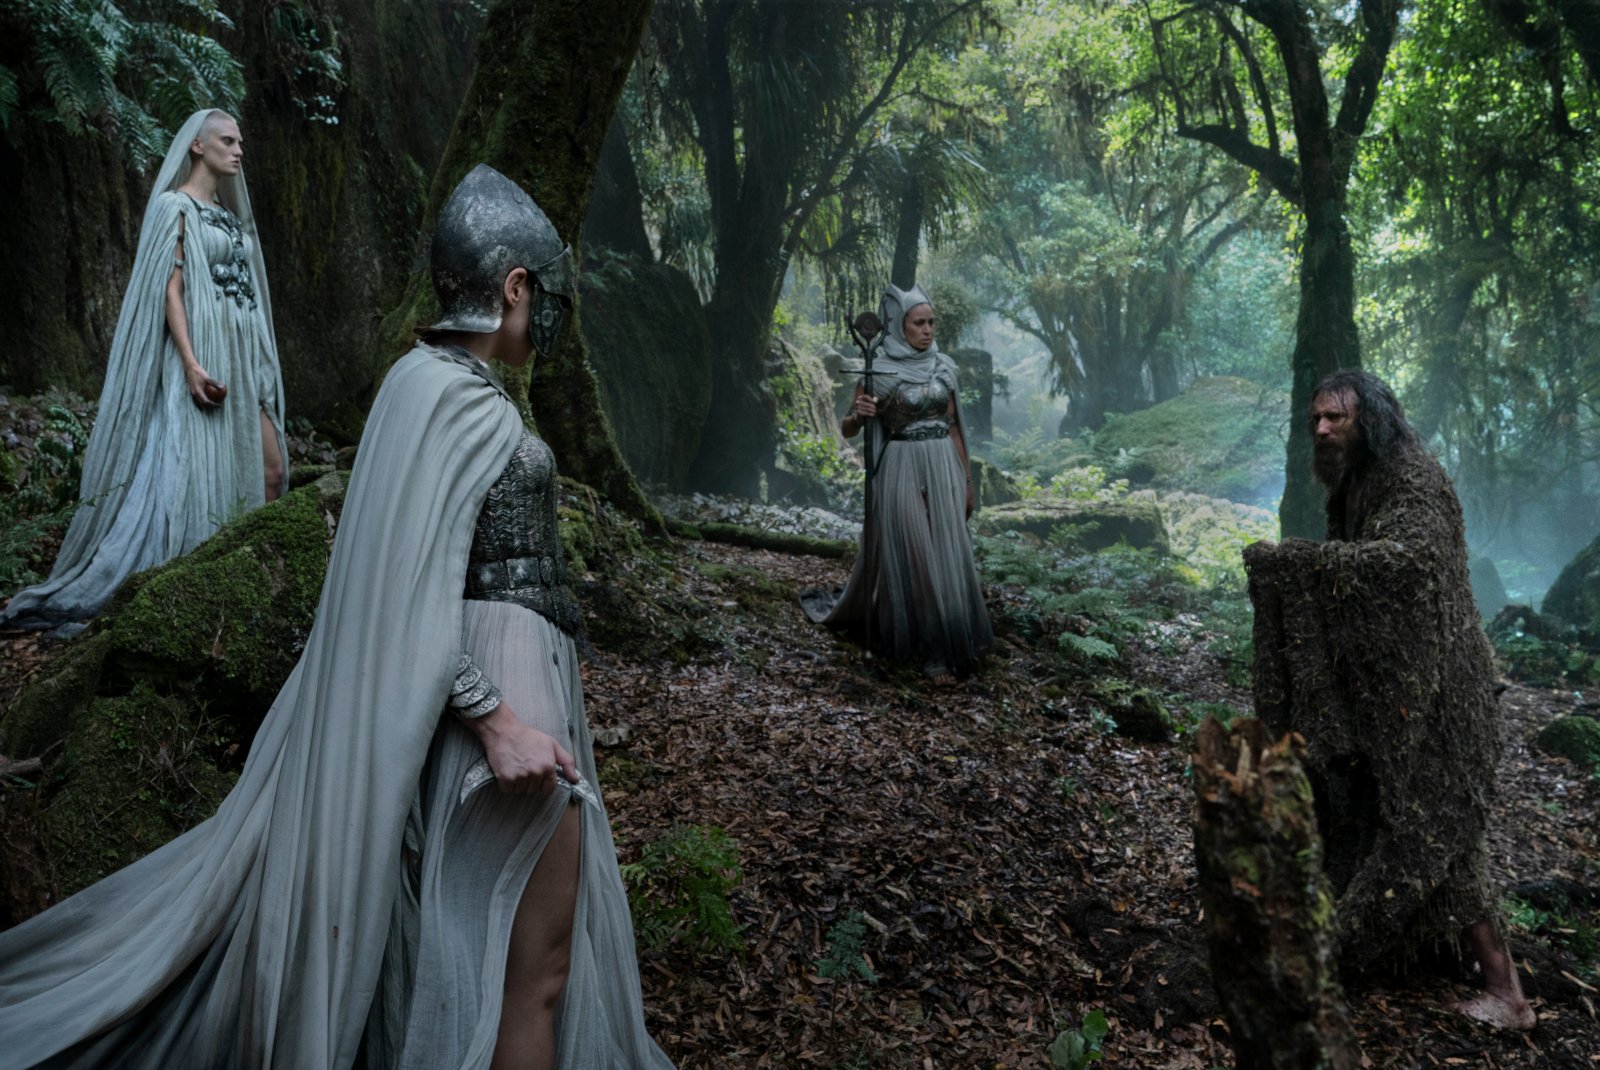 Daniel Weyman as The Stranger fighting the three White Cloaks in 'The Rings of Power' finale for our article about season 1's ending. They're surrounded by trees.